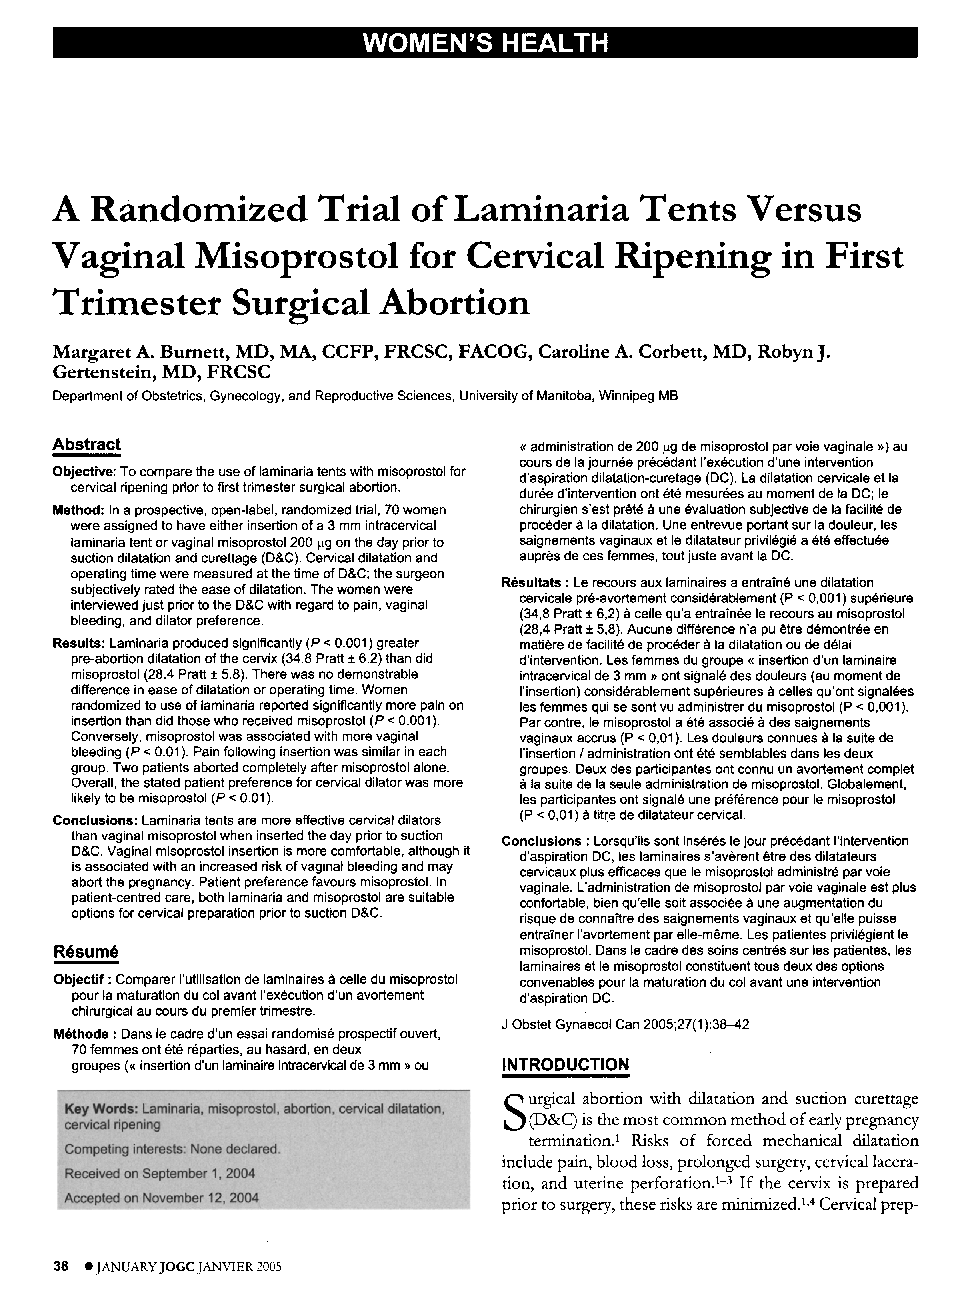 A Randomized Trial of Laminaria Tents Versus Vaginal Misoprostol for Cervical Ripening in First Trimester Surgical Abortion